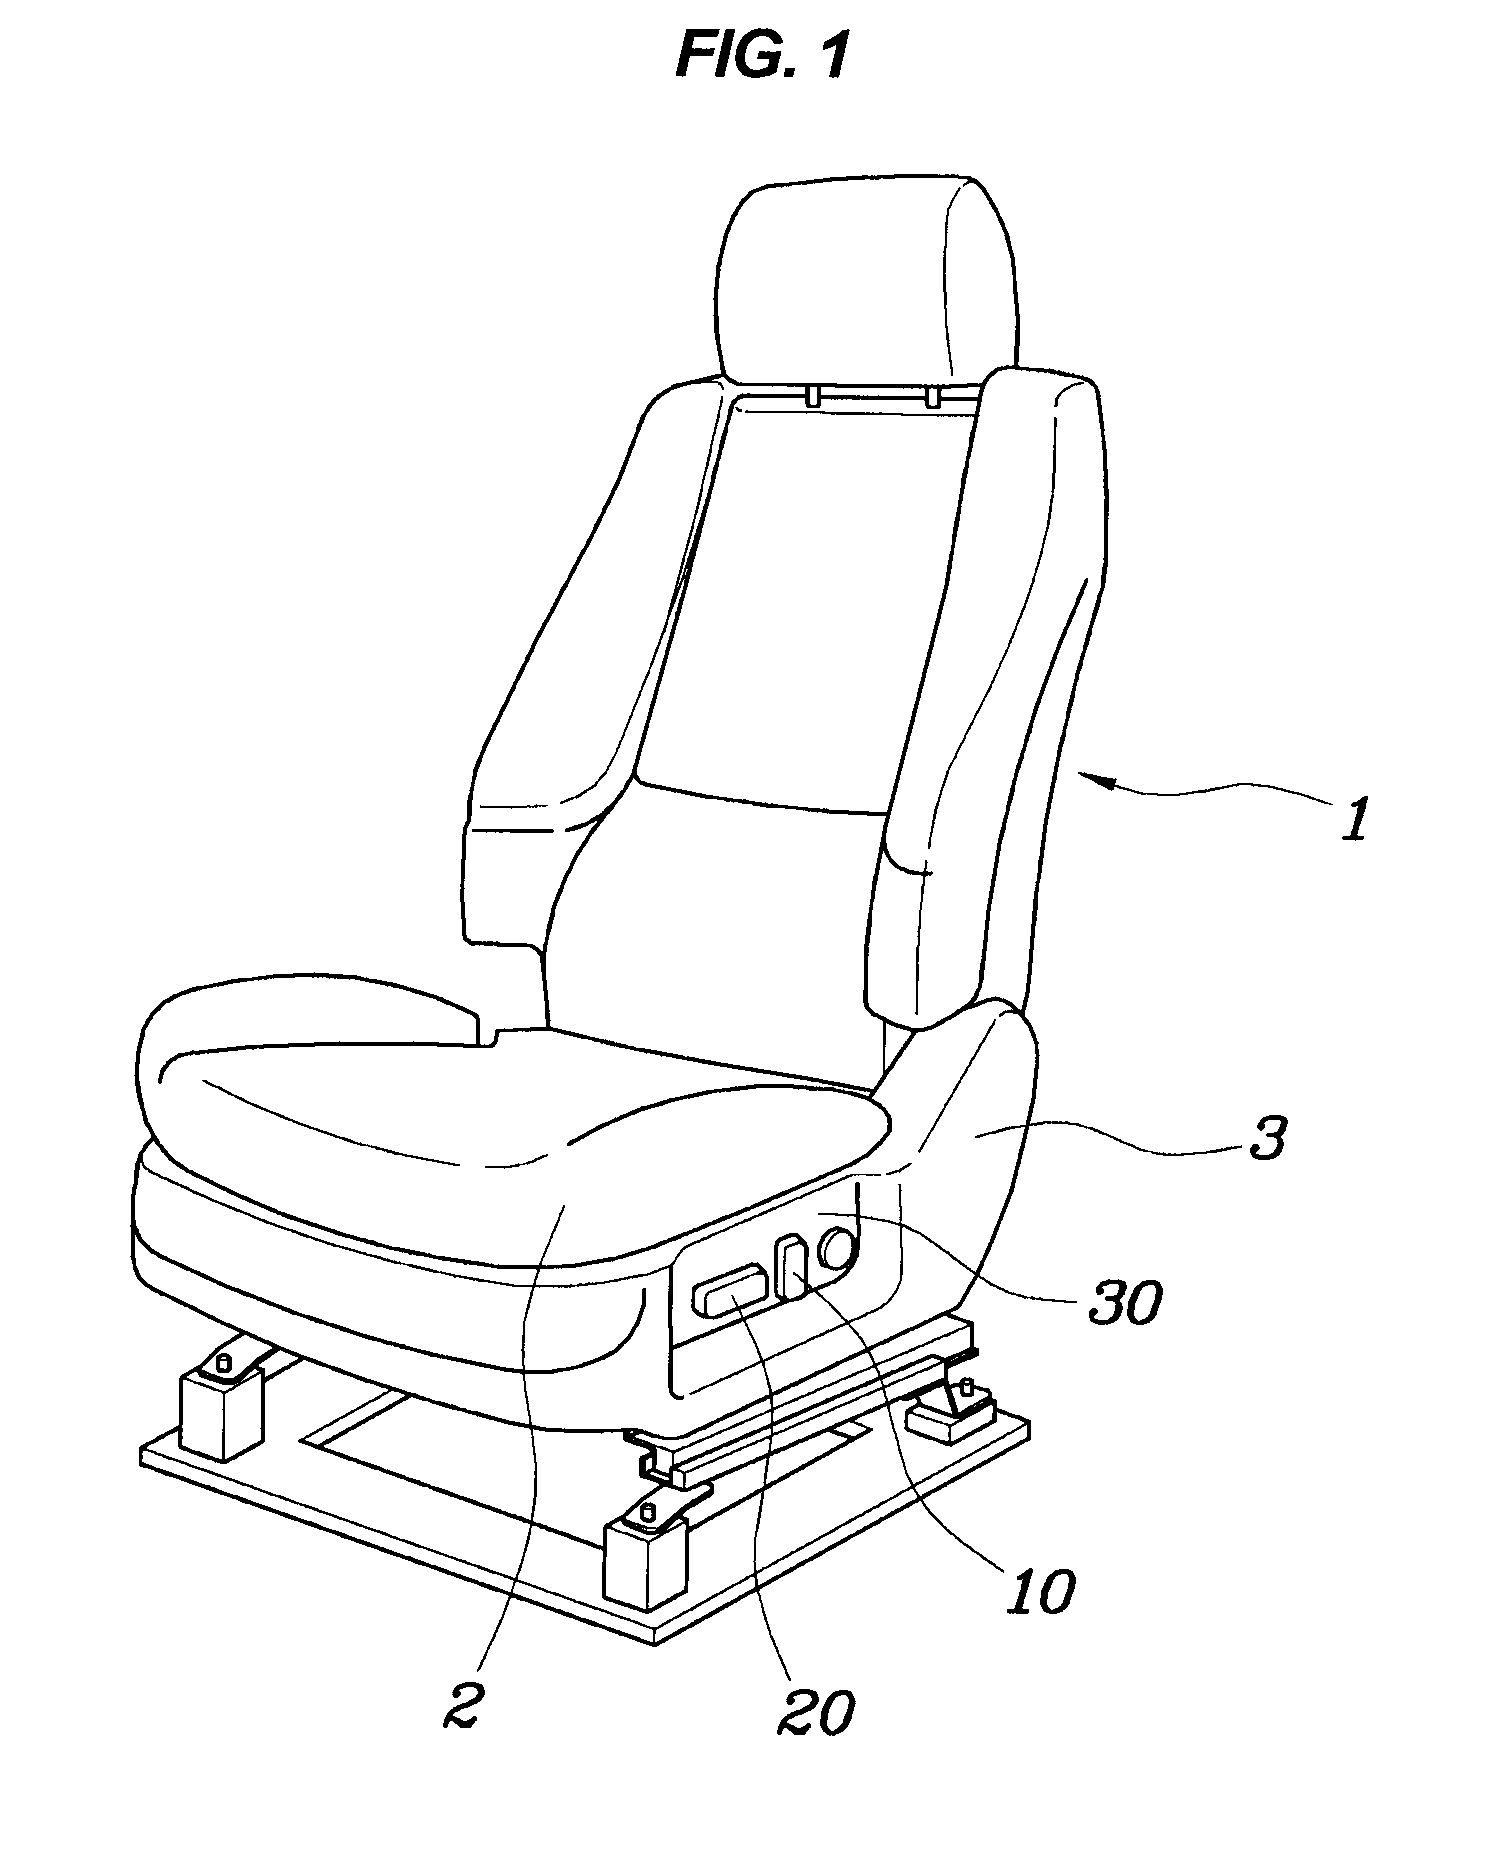 Switch apparatus for adjusting power seat in vehicle